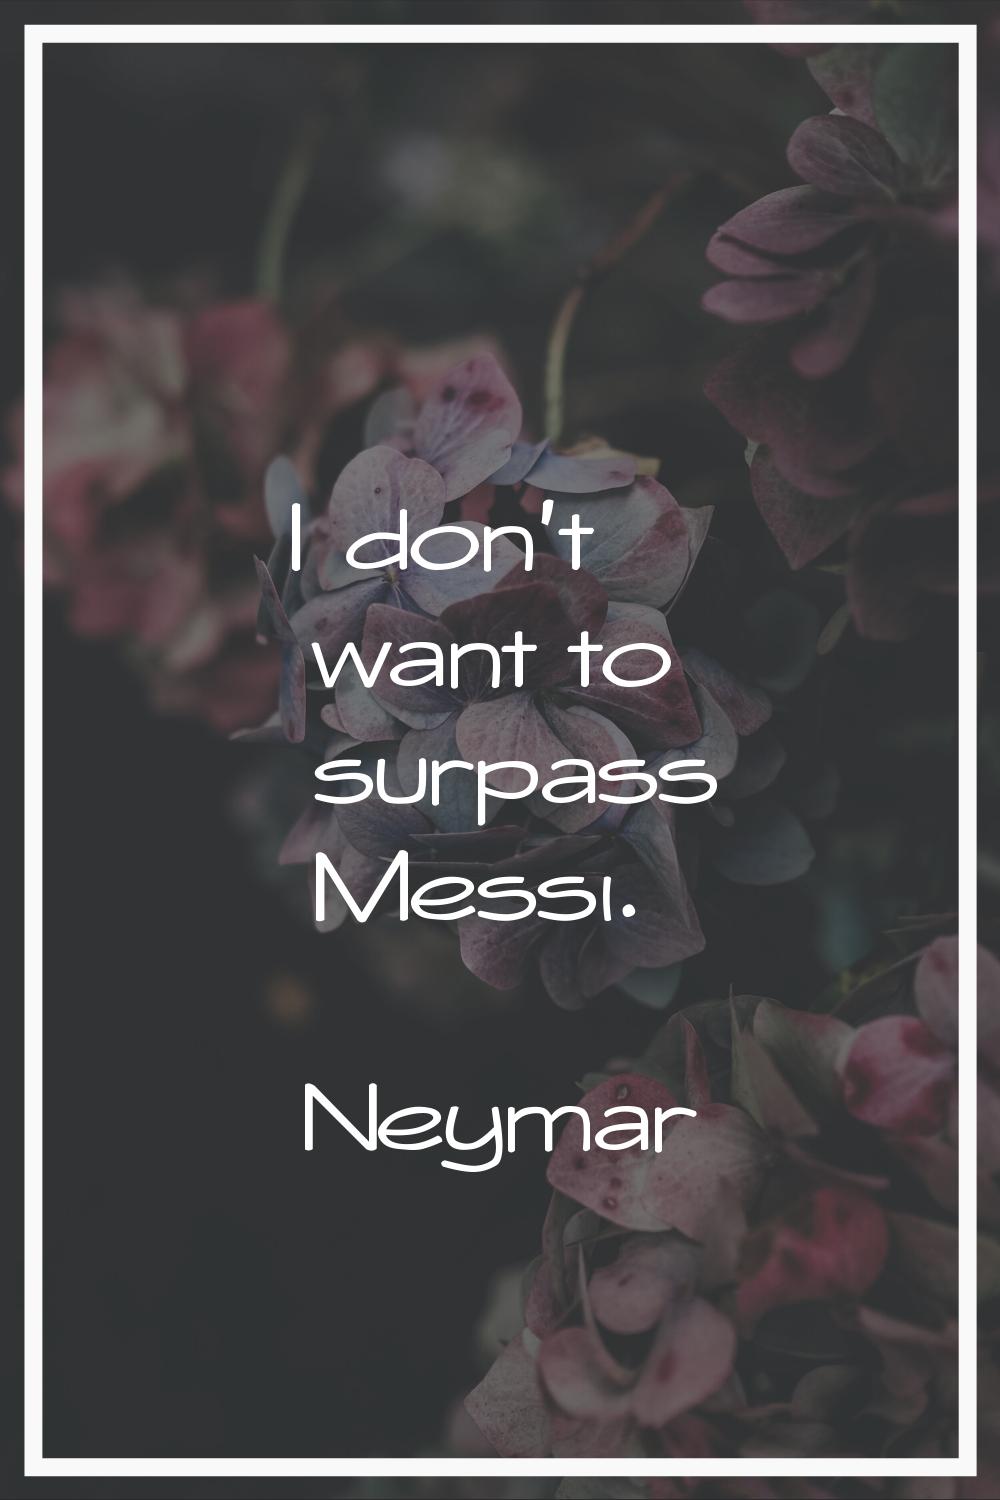 I don't want to surpass Messi.